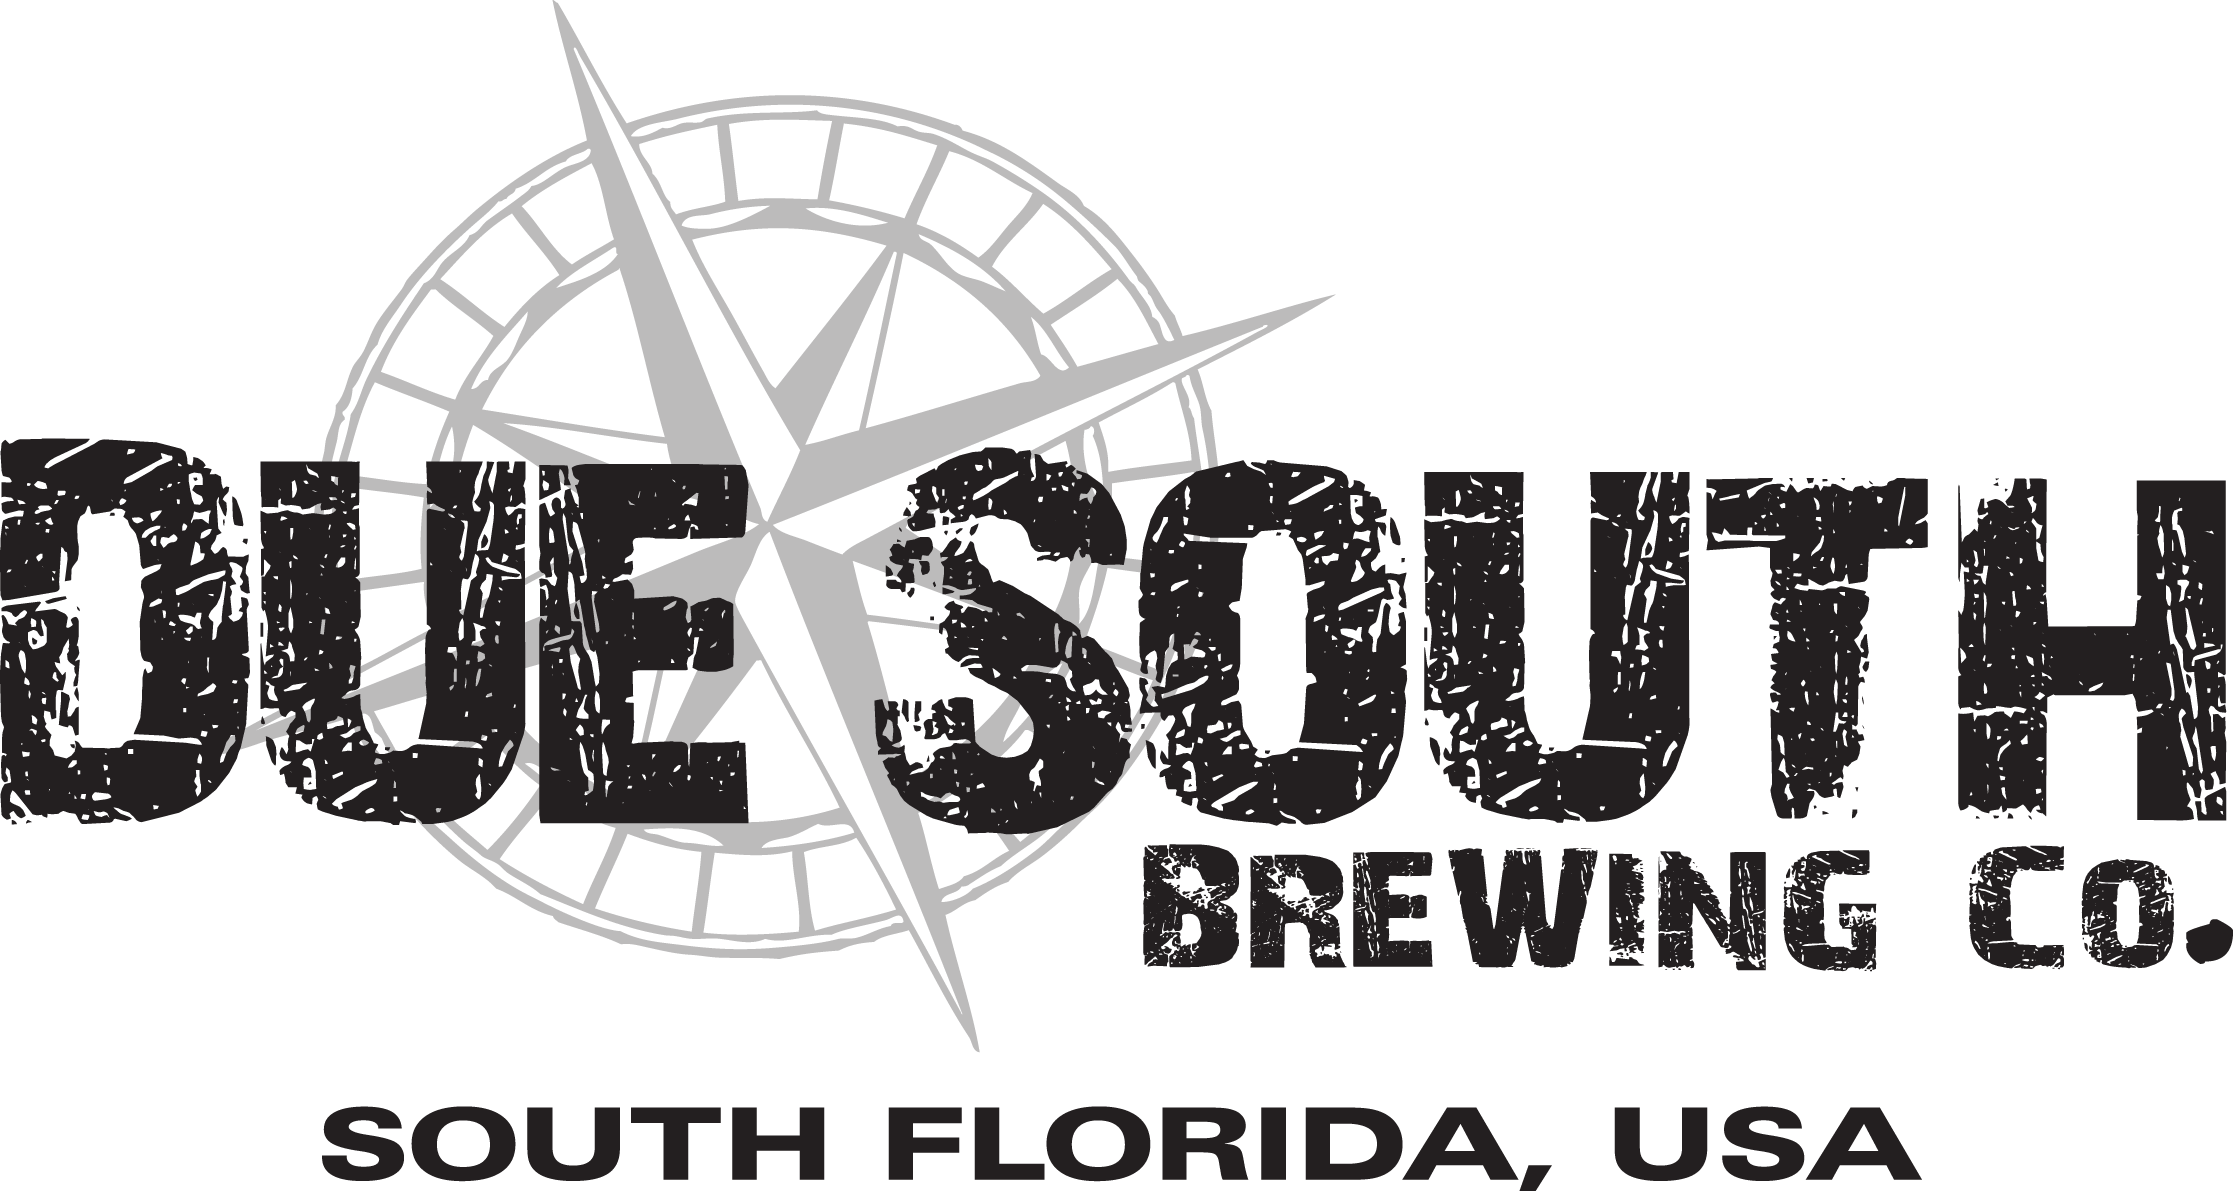 Due South Brewing